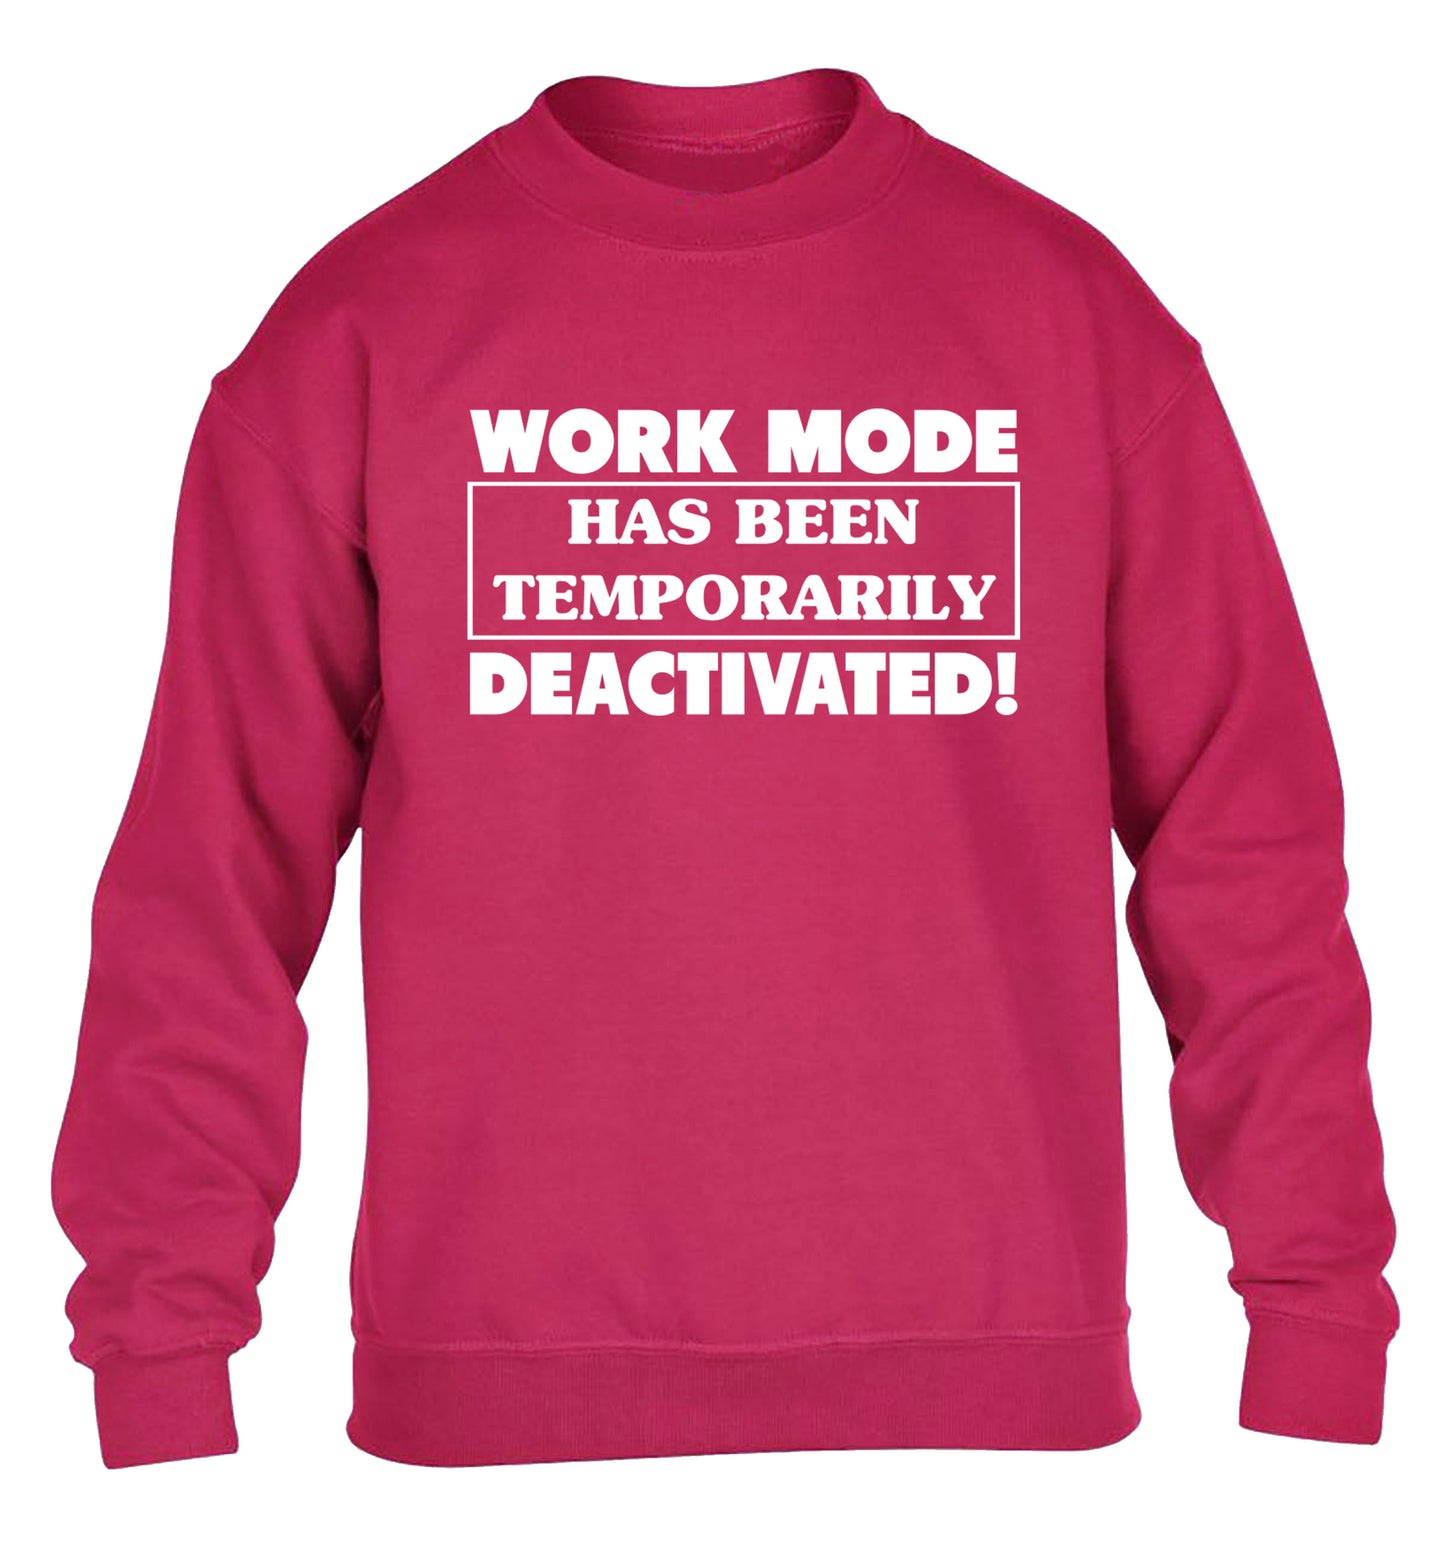 Work mode has now been temporarily deactivated children's pink sweater 12-13 Years